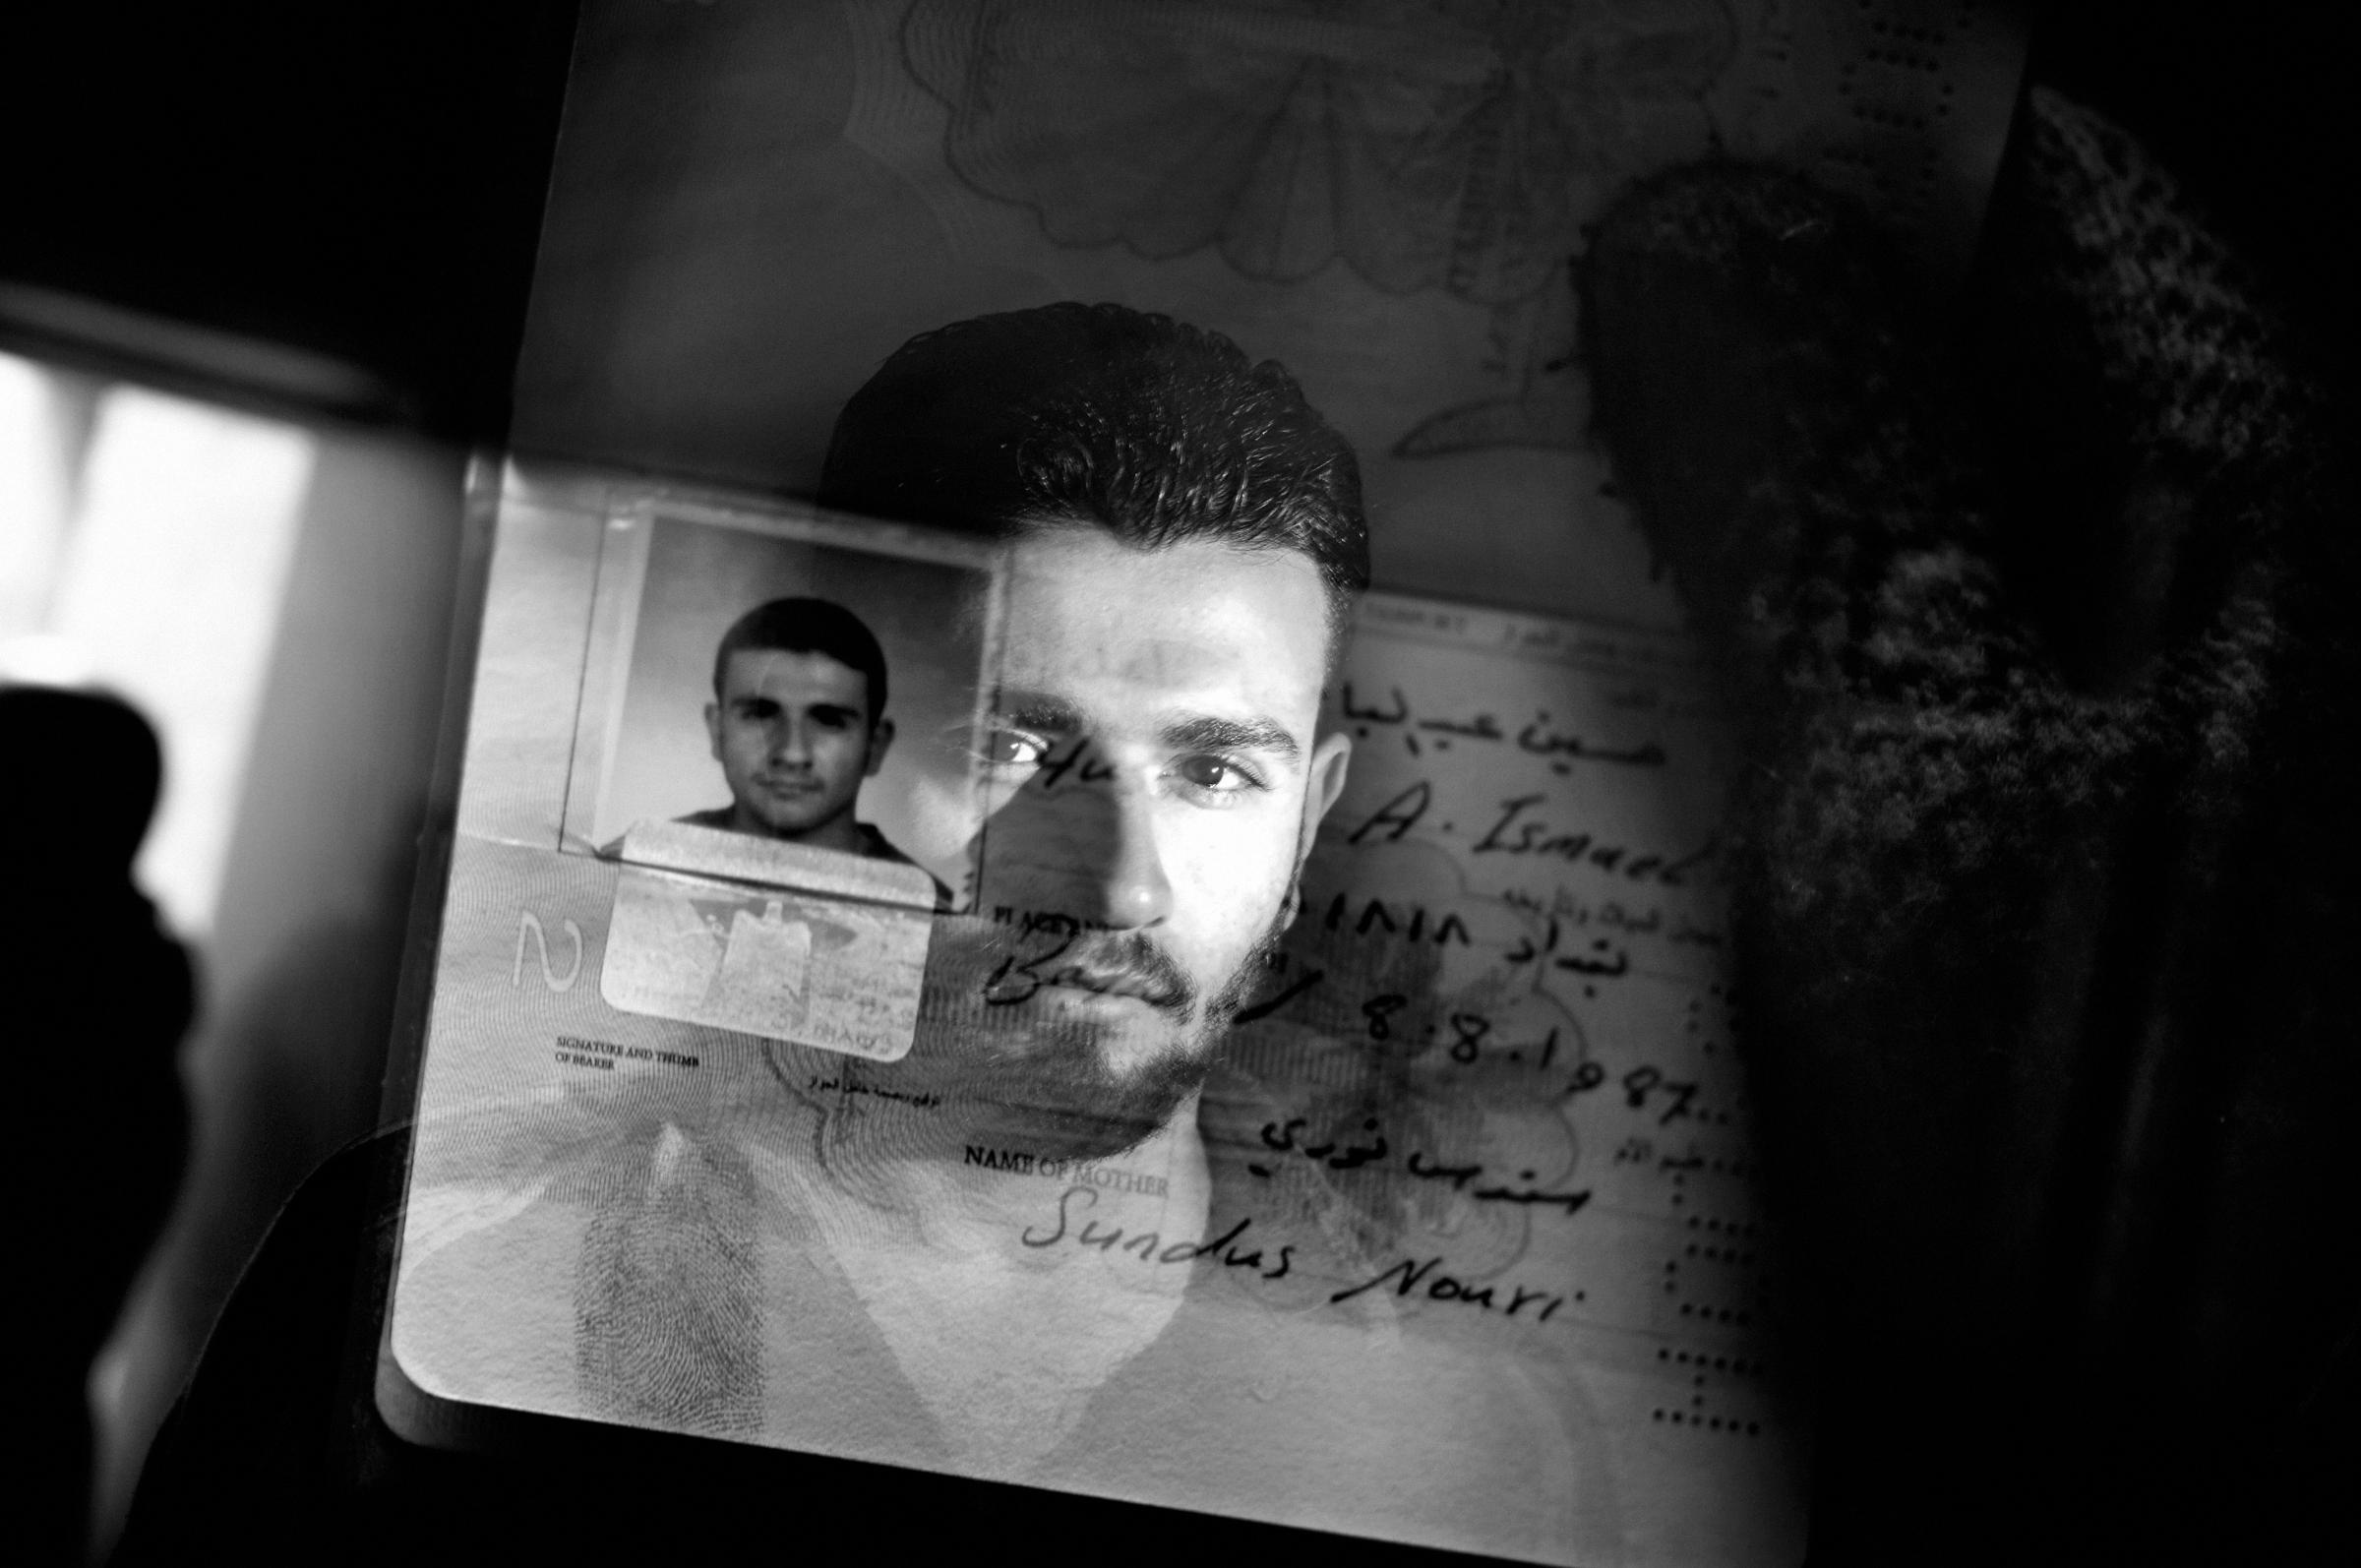 A double exposure portrait of a Sunni student with his identity card in the Sunni Adhamiya neighborhood, Baghdad, Iraq January 22, 2007.During the height of the civil war, as the city divided along sectarian lines, a Sunni or Shia name appearing on an identify card could result in death sentence.